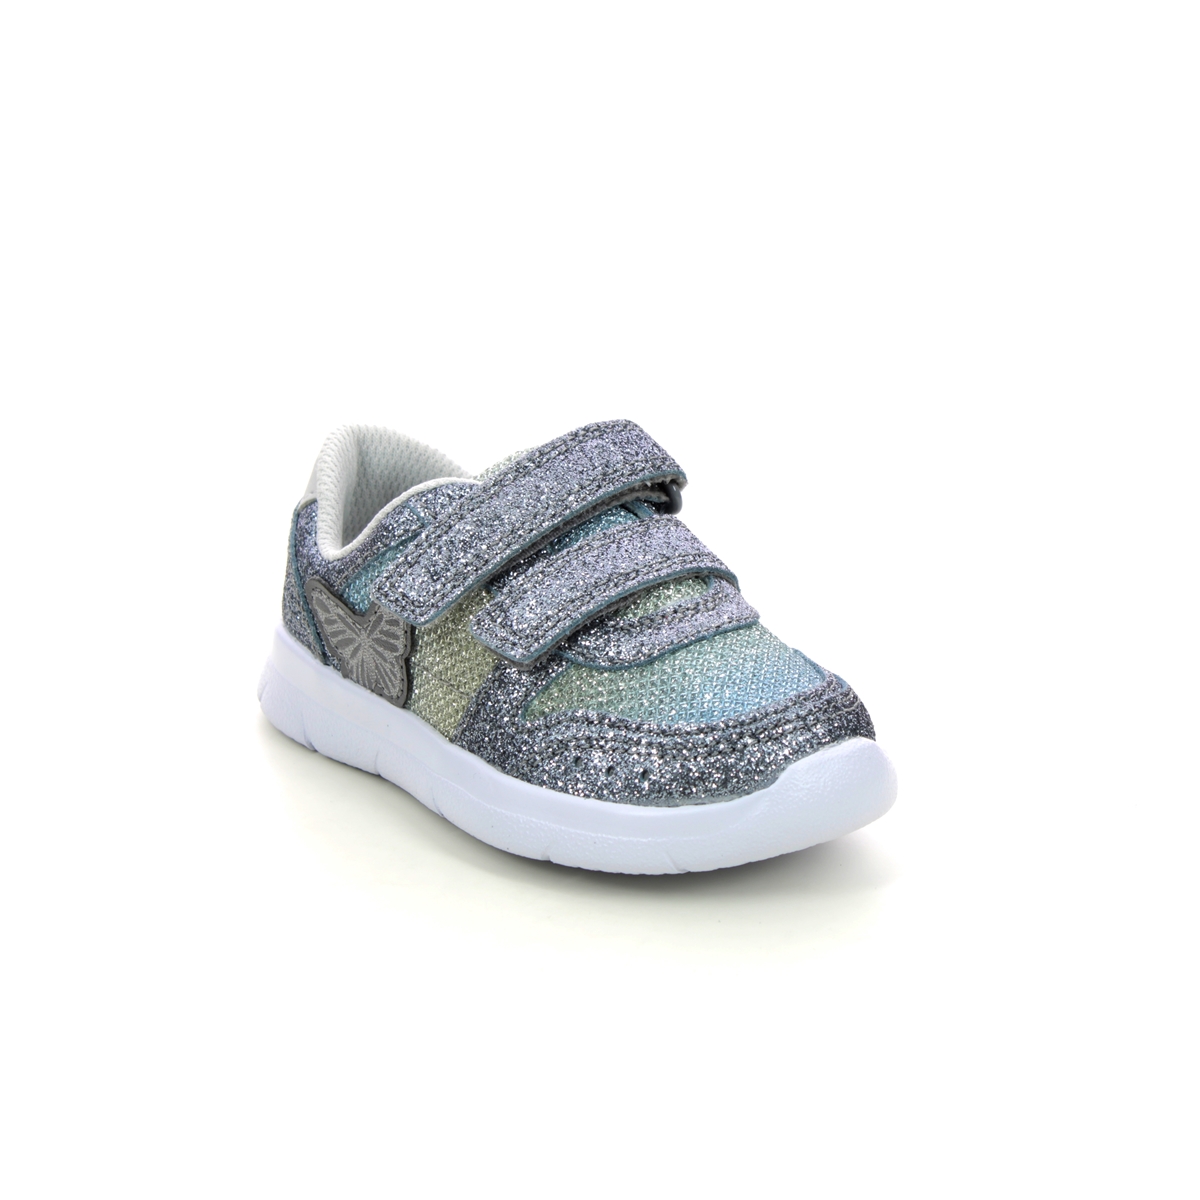 Clarks Ath Wing T Metallic Kids Toddler Girls Trainers 623197G In Size 5 In Plain Metallic G Width Fitting For kids